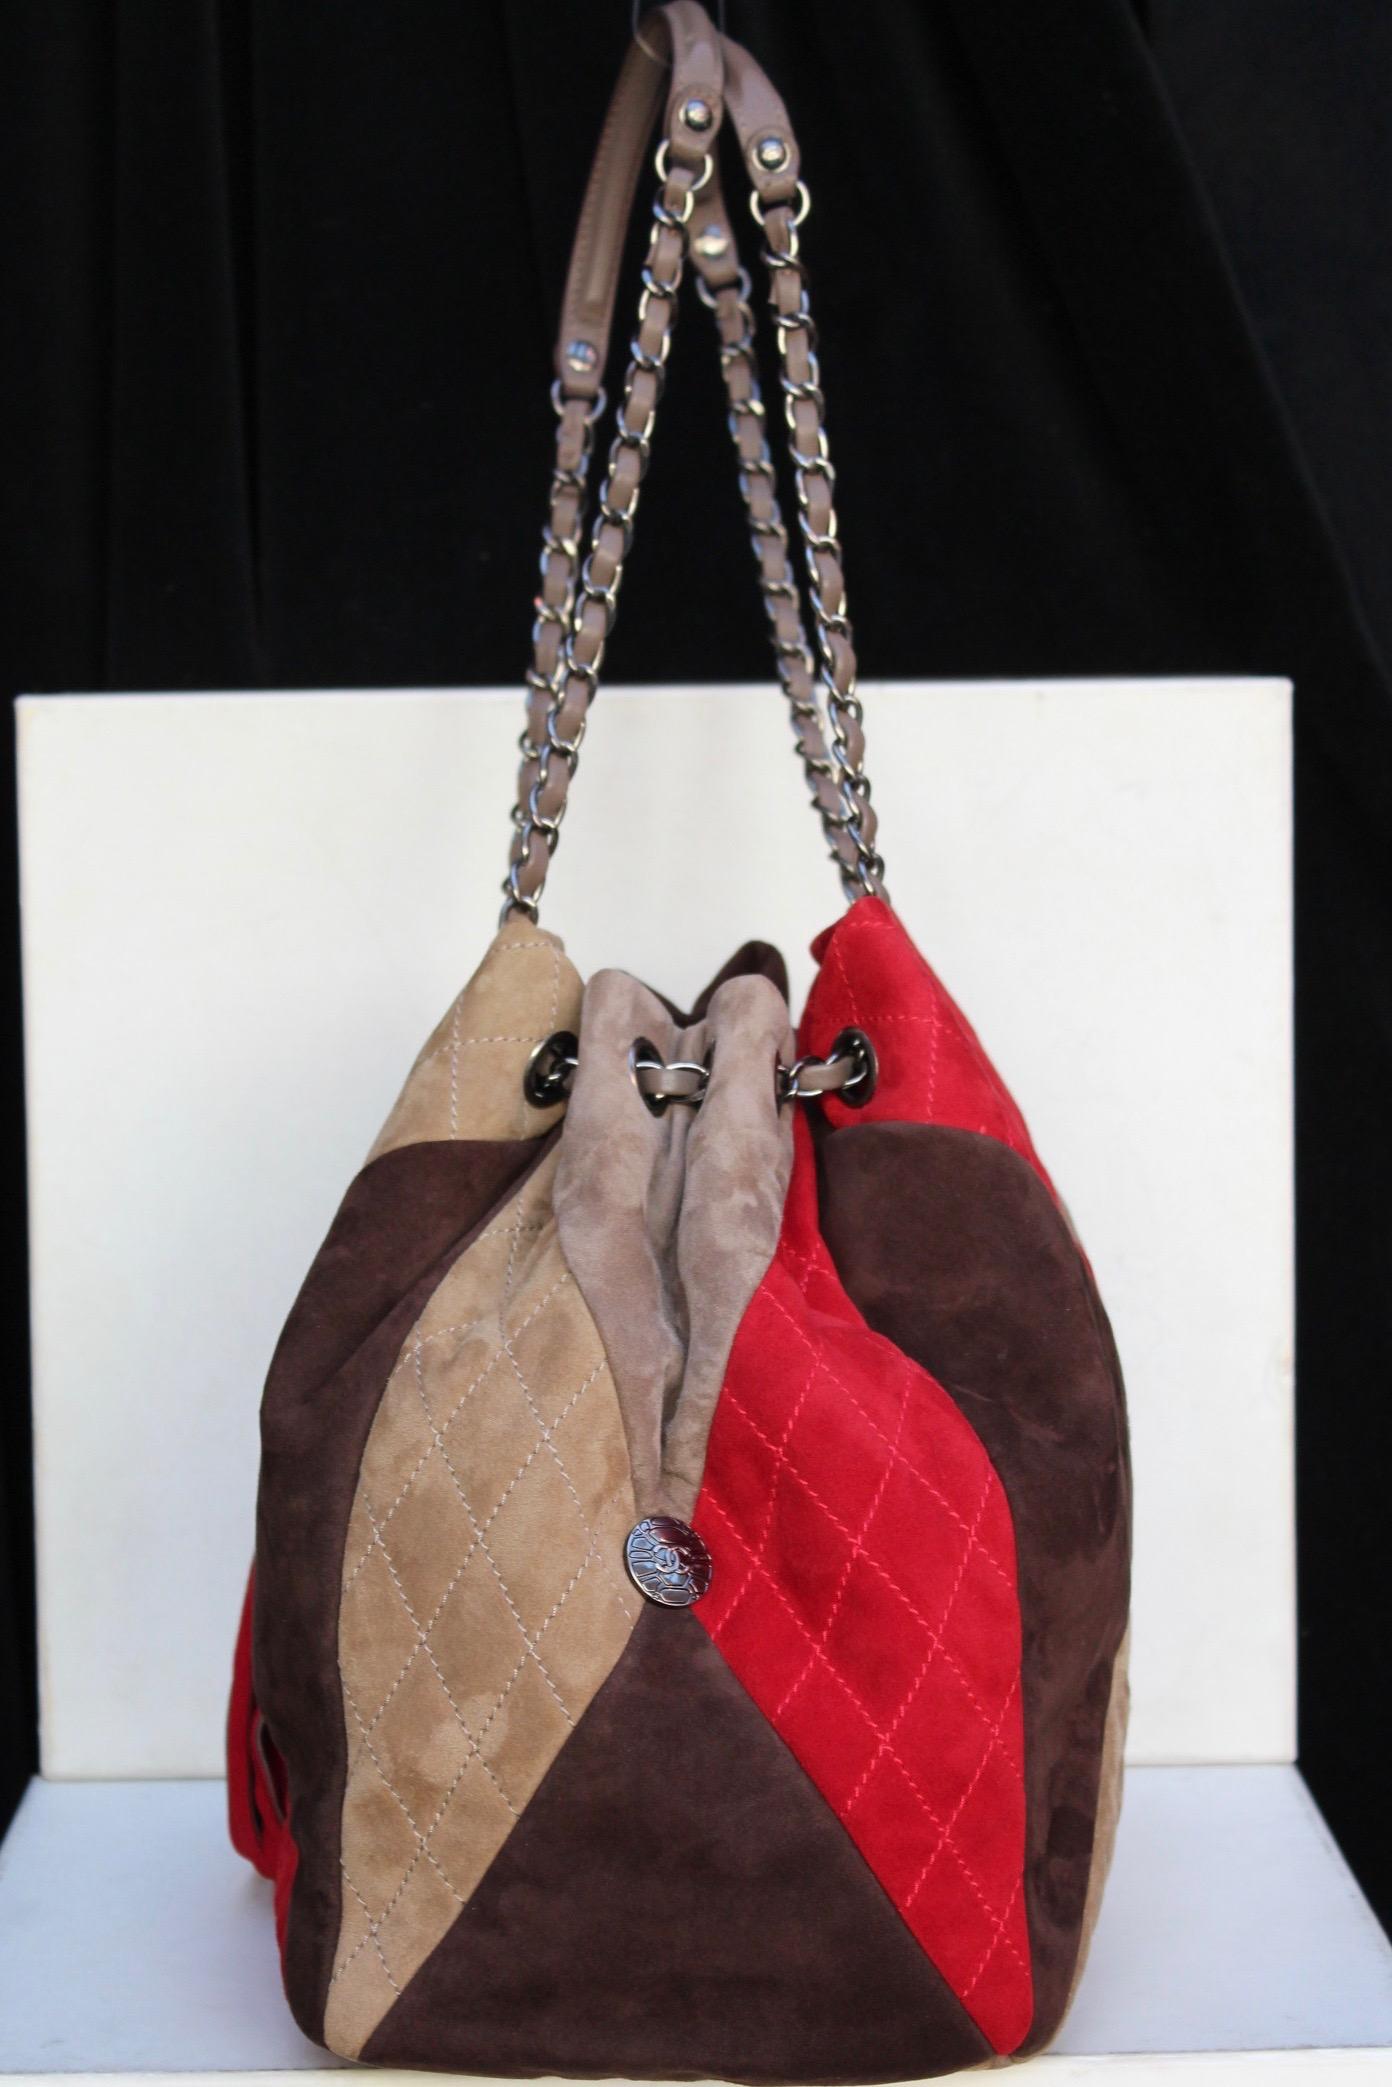 CHANEL (Made in France) Large tote bag in the shape of a purse, composed of quilted suede in a patchwork of red, brown, tan and beige colors. It features a double handle composed of silvery metal entwined with beige leather. A large red suede tassel